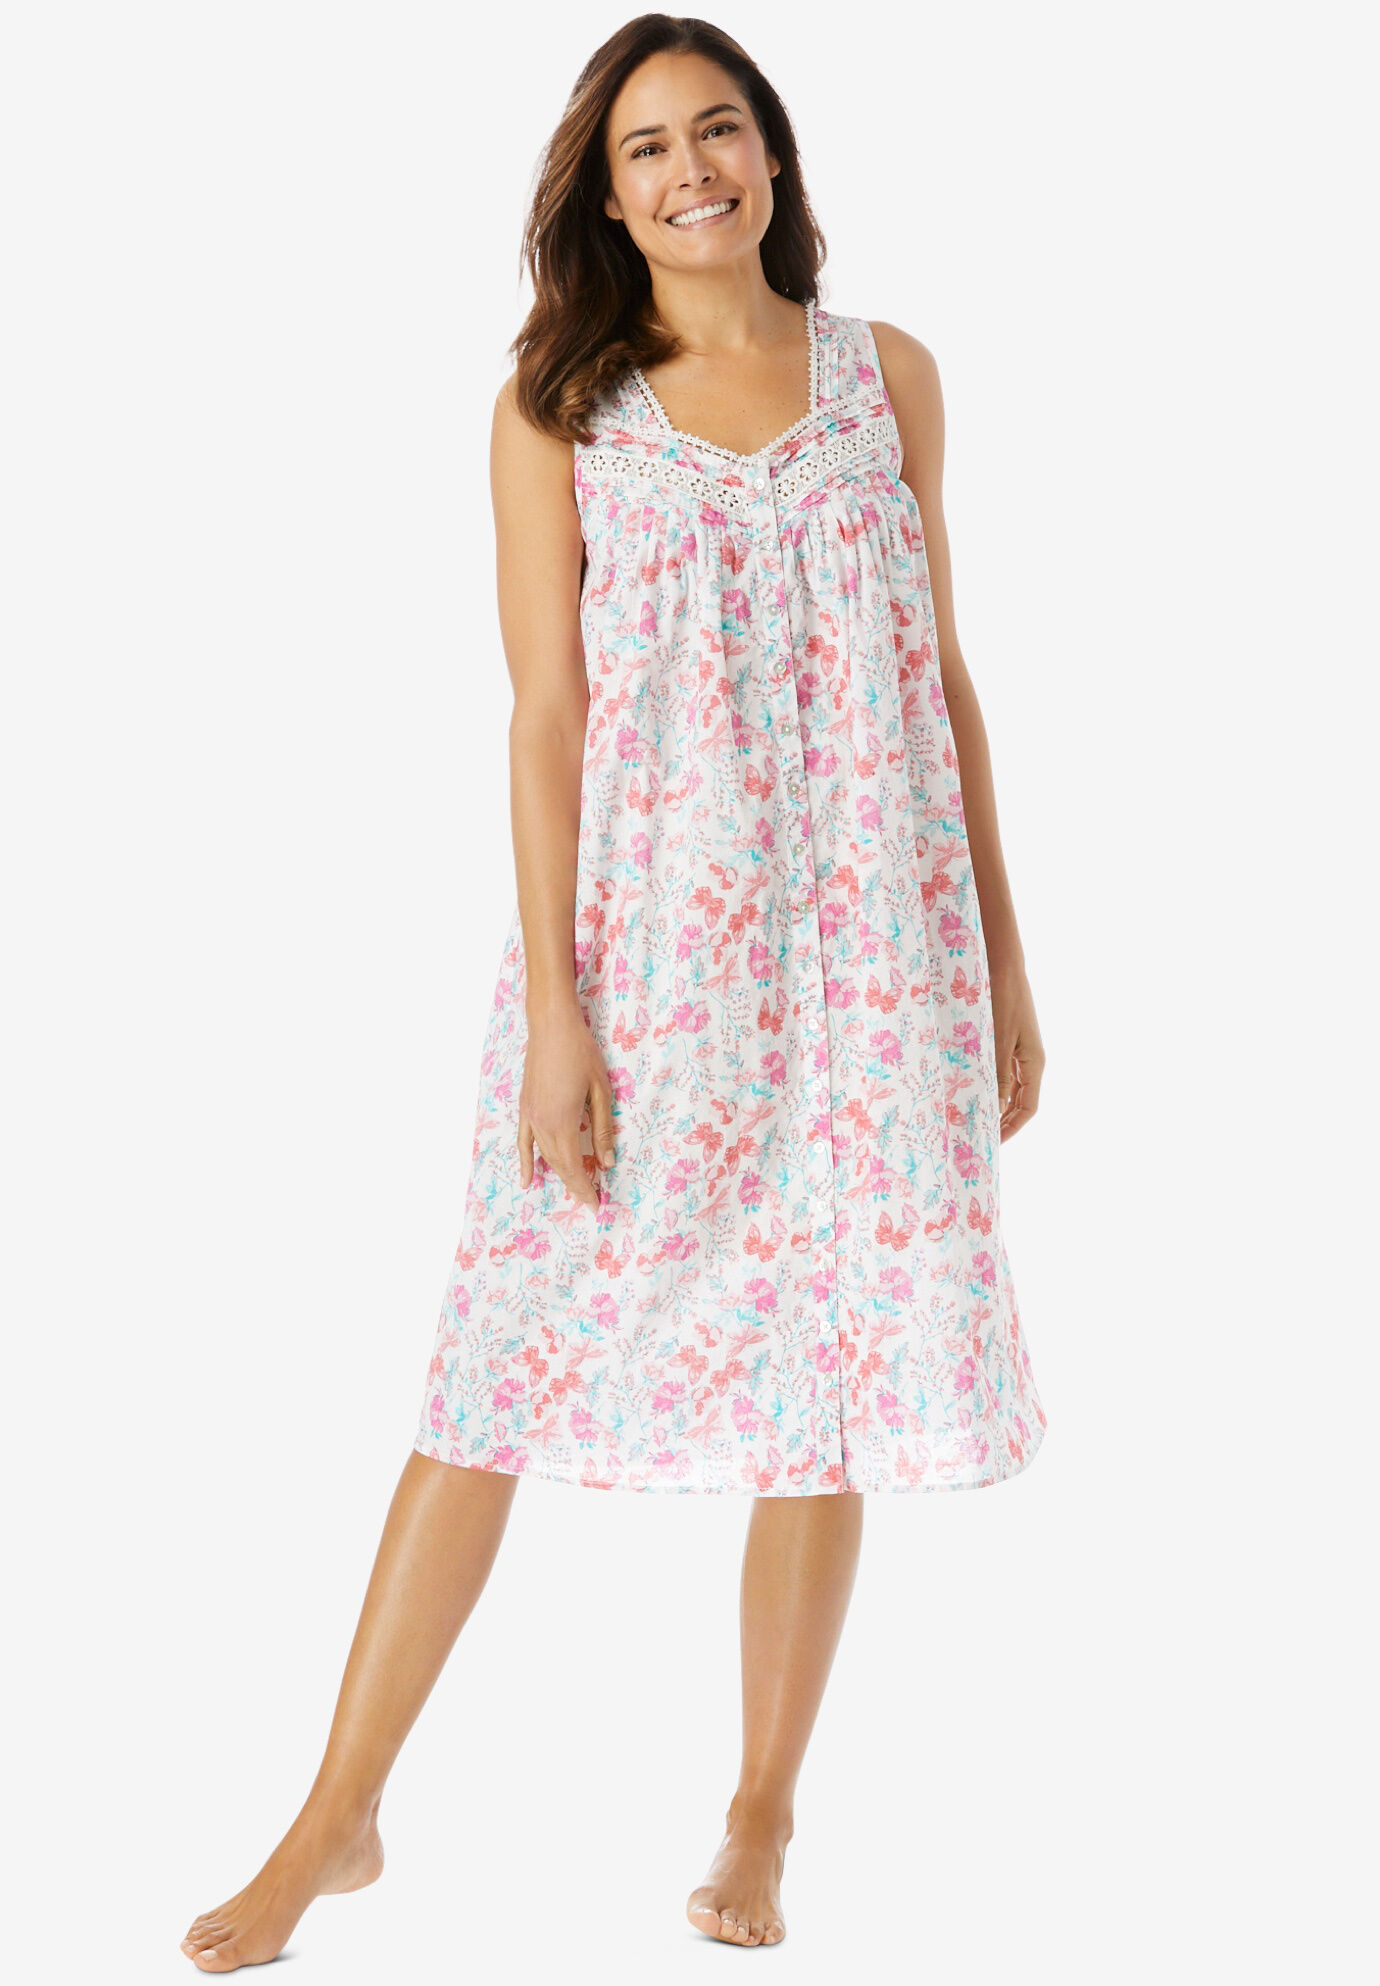 Sleeveless cotton dress with highlighted anchor thread embroidery